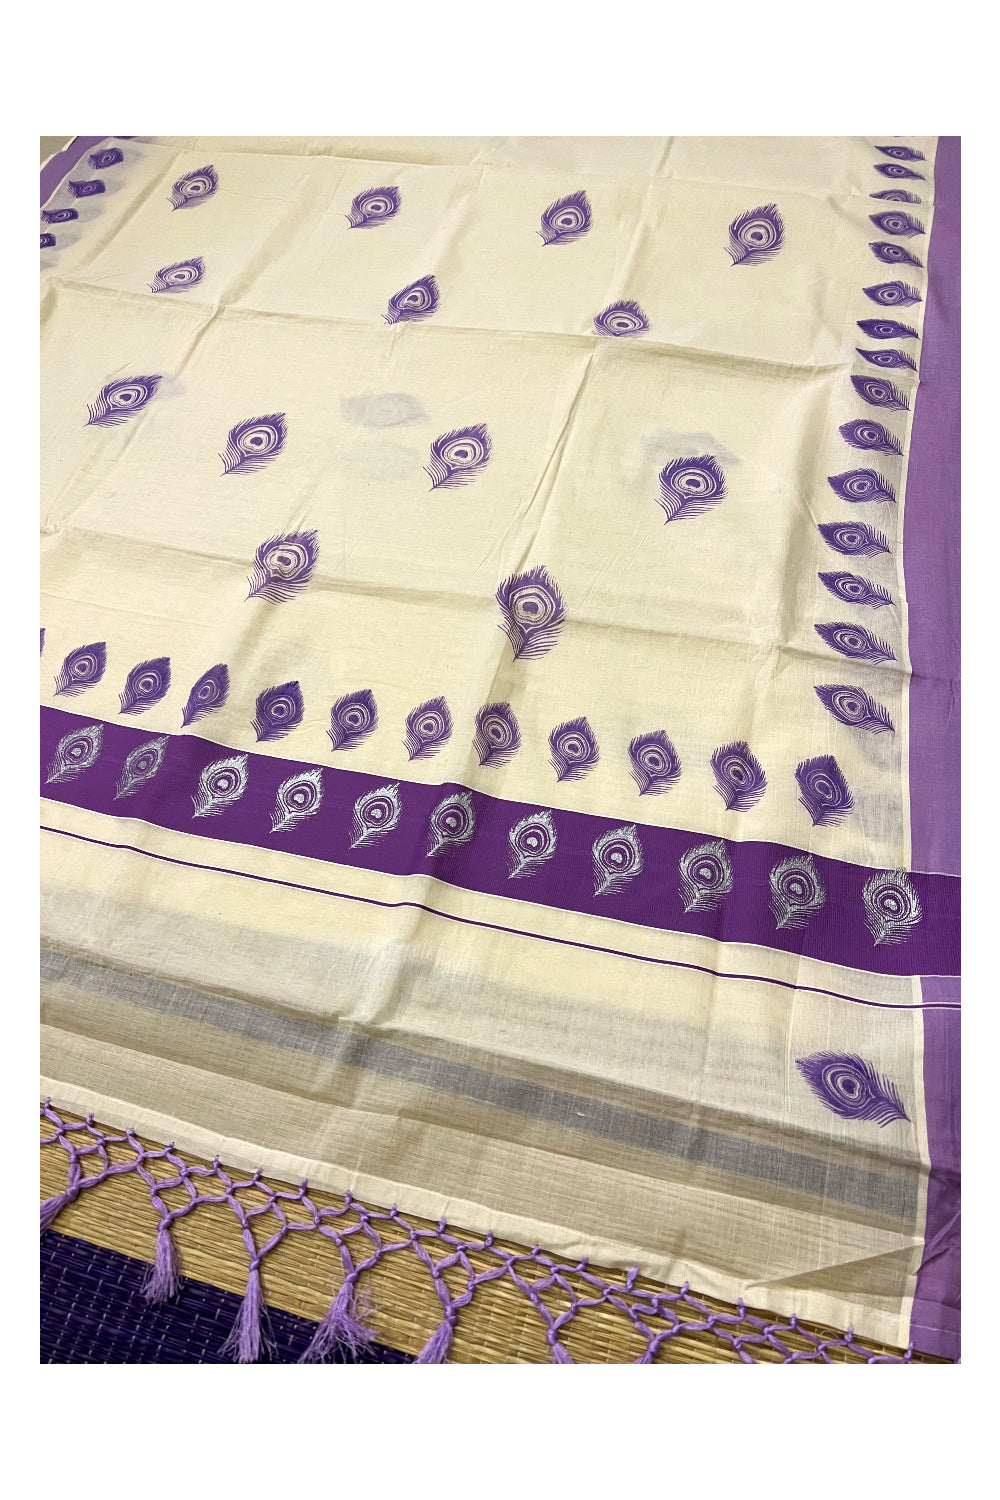 Off White Pure Cotton Kerala Saree with Peacock Feather Block Prints on Violet Border and Tassels on Pallu